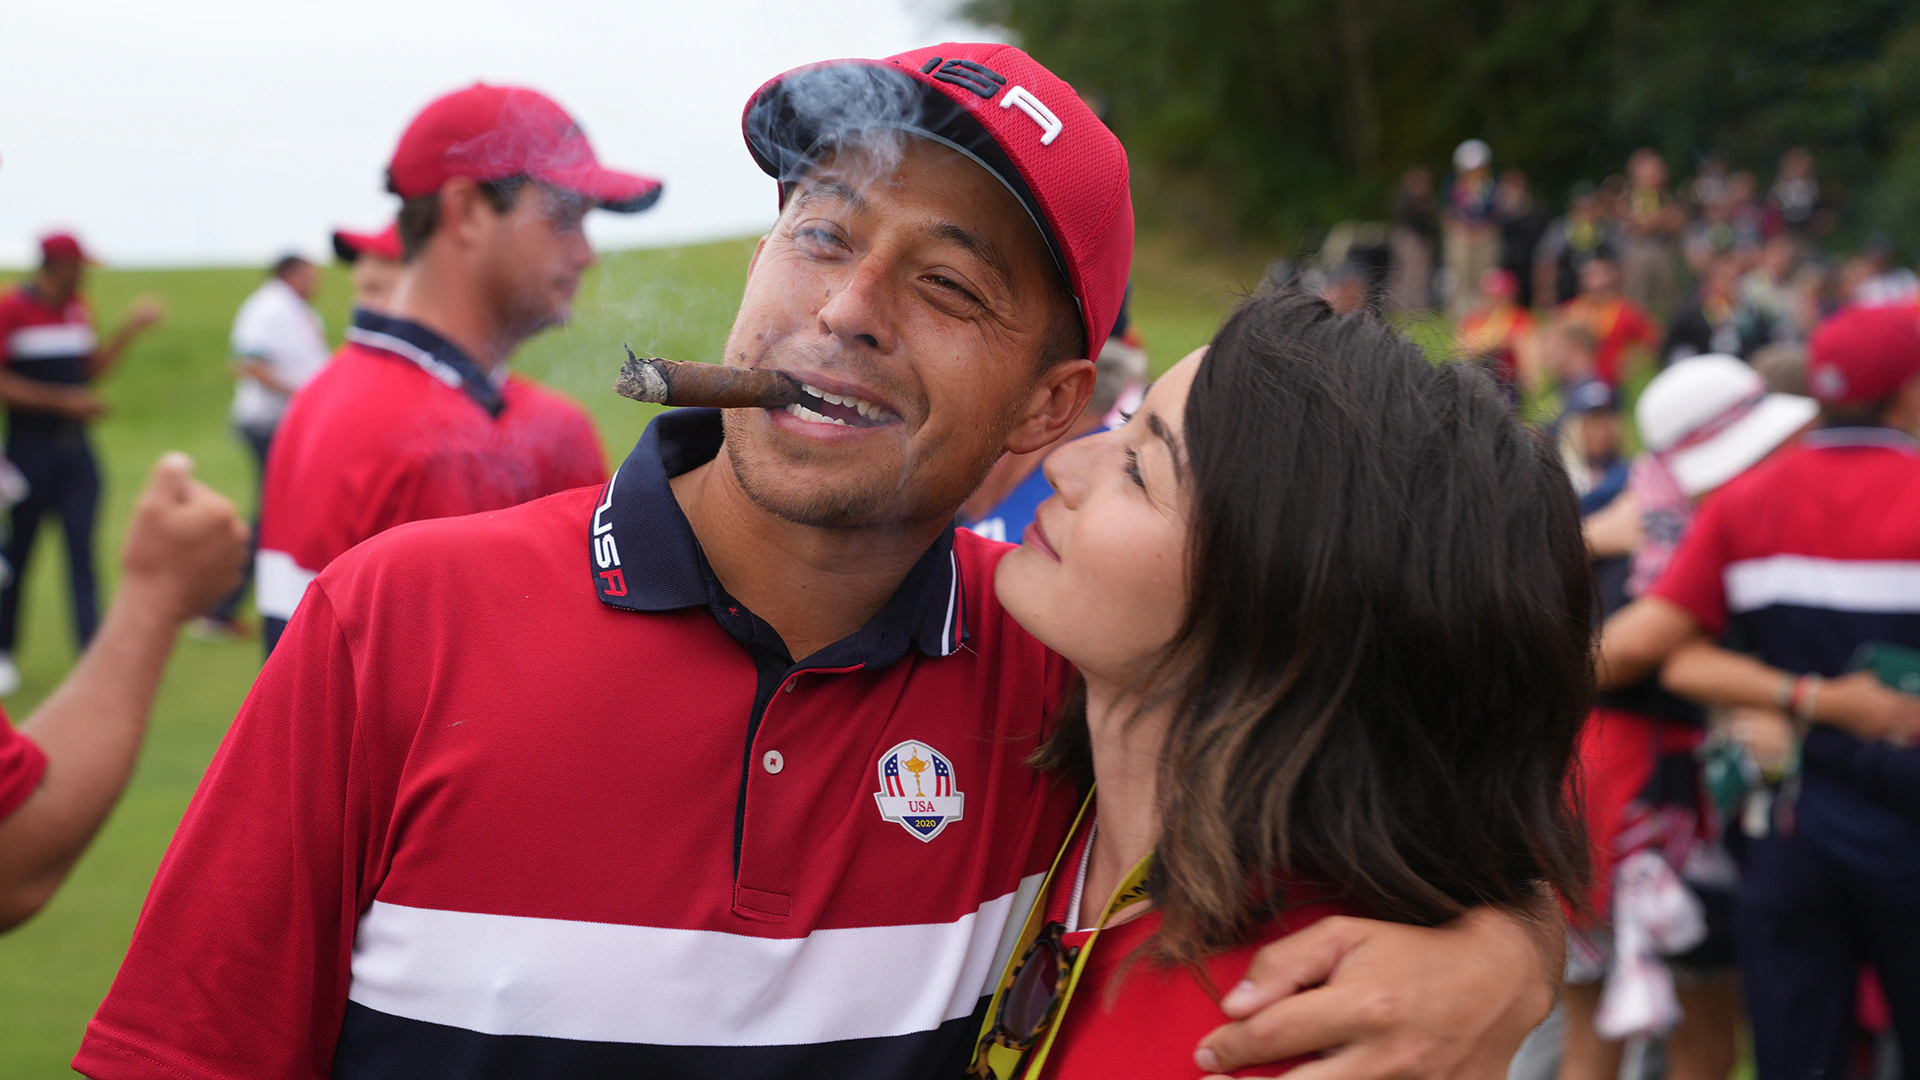 Xander Schauffele finally sobered up after Ryder Cup, ready for season debut